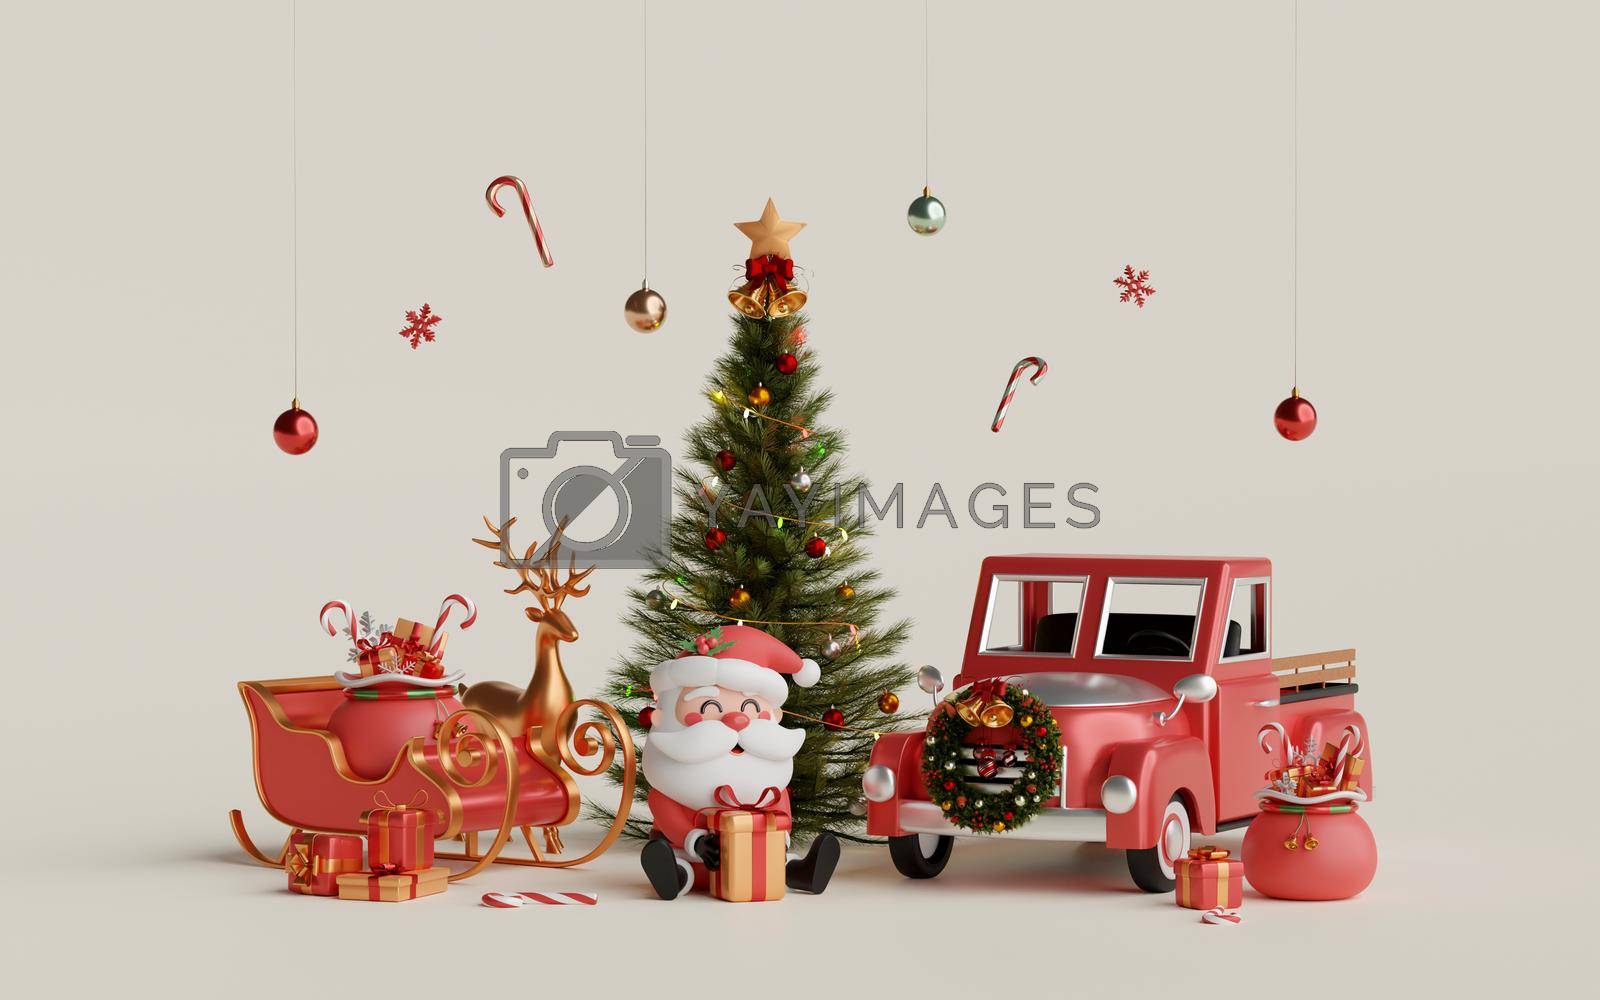 Christmas 3d illustration of Christmas celebration with Santa Claus and Christmas decoration